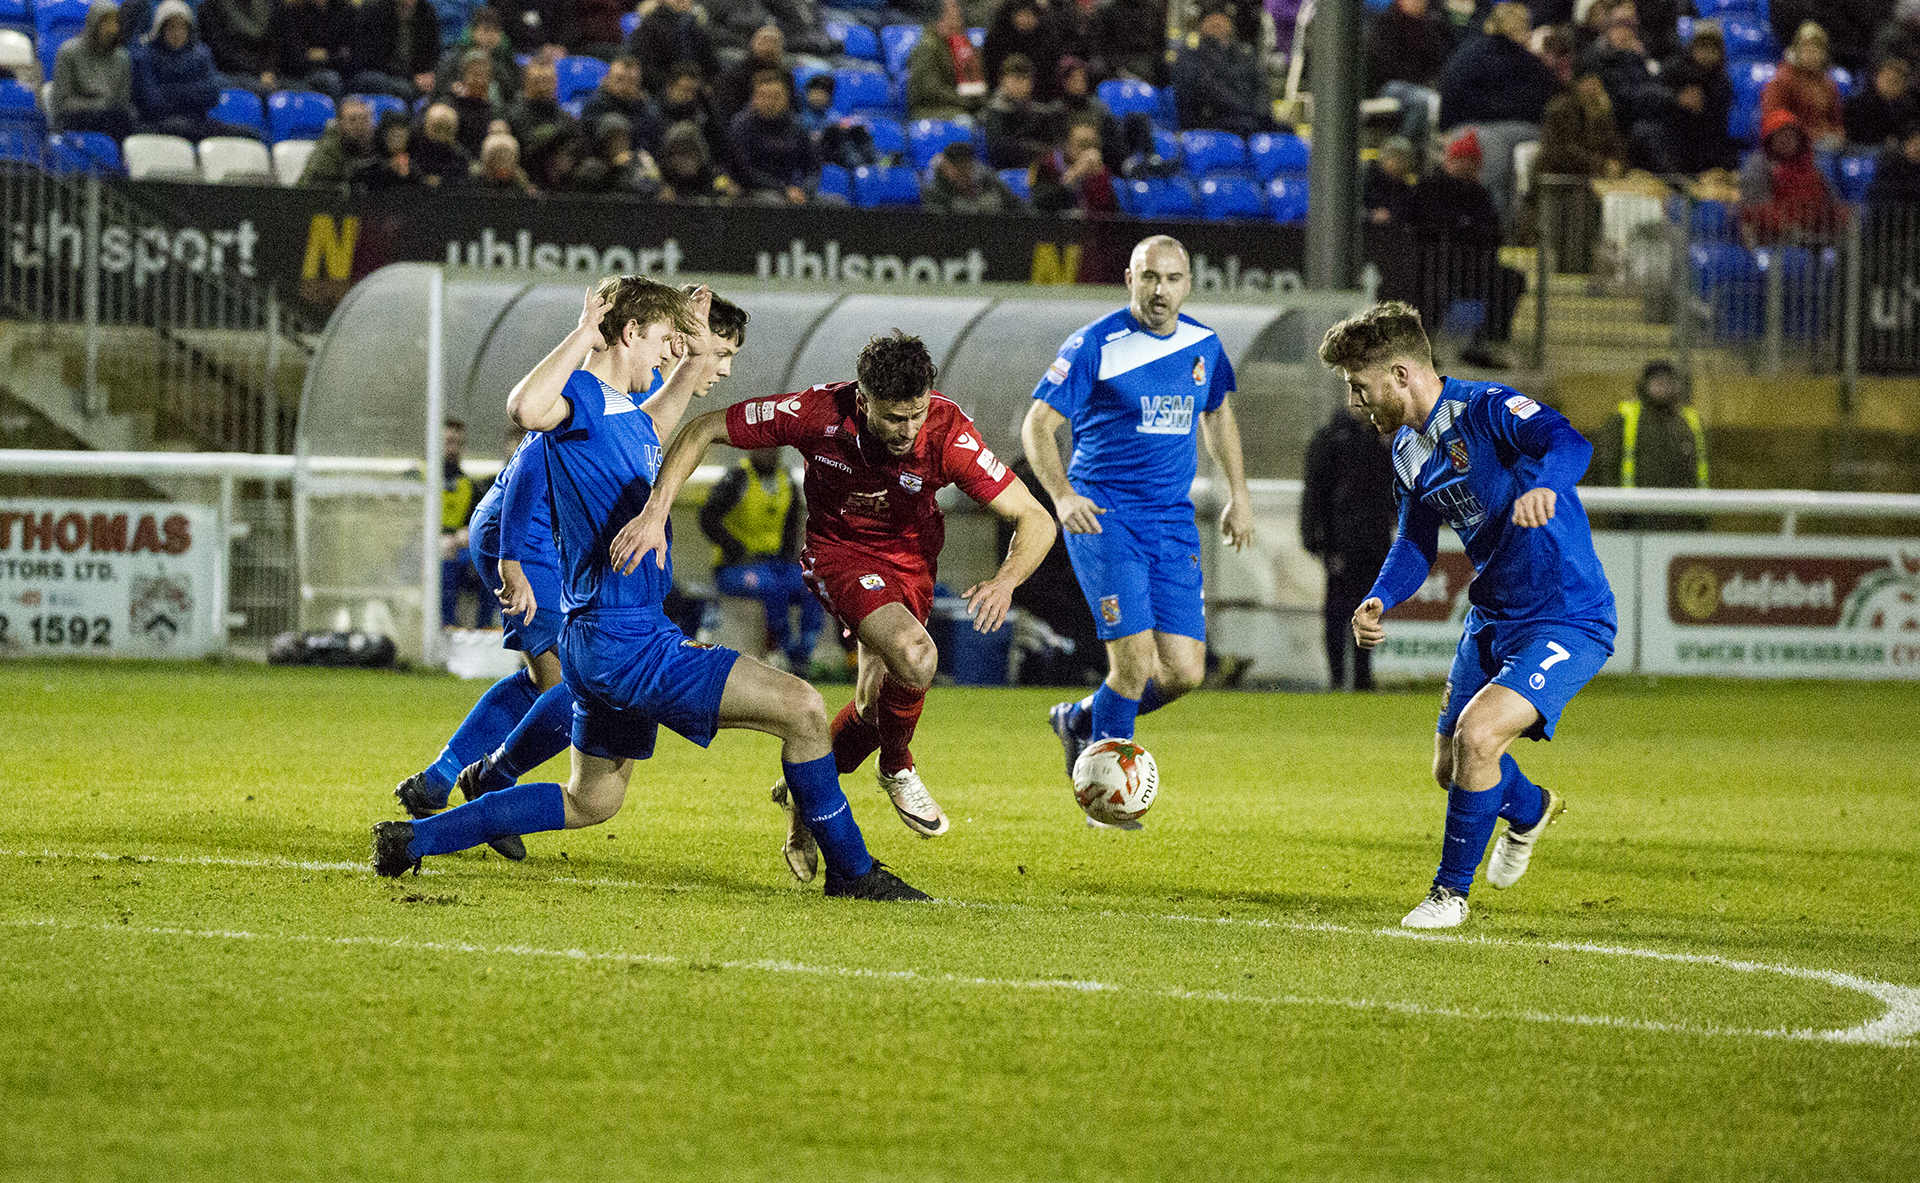 Nathan Woolfe is challenged by Bangor's defence - © NCM Media